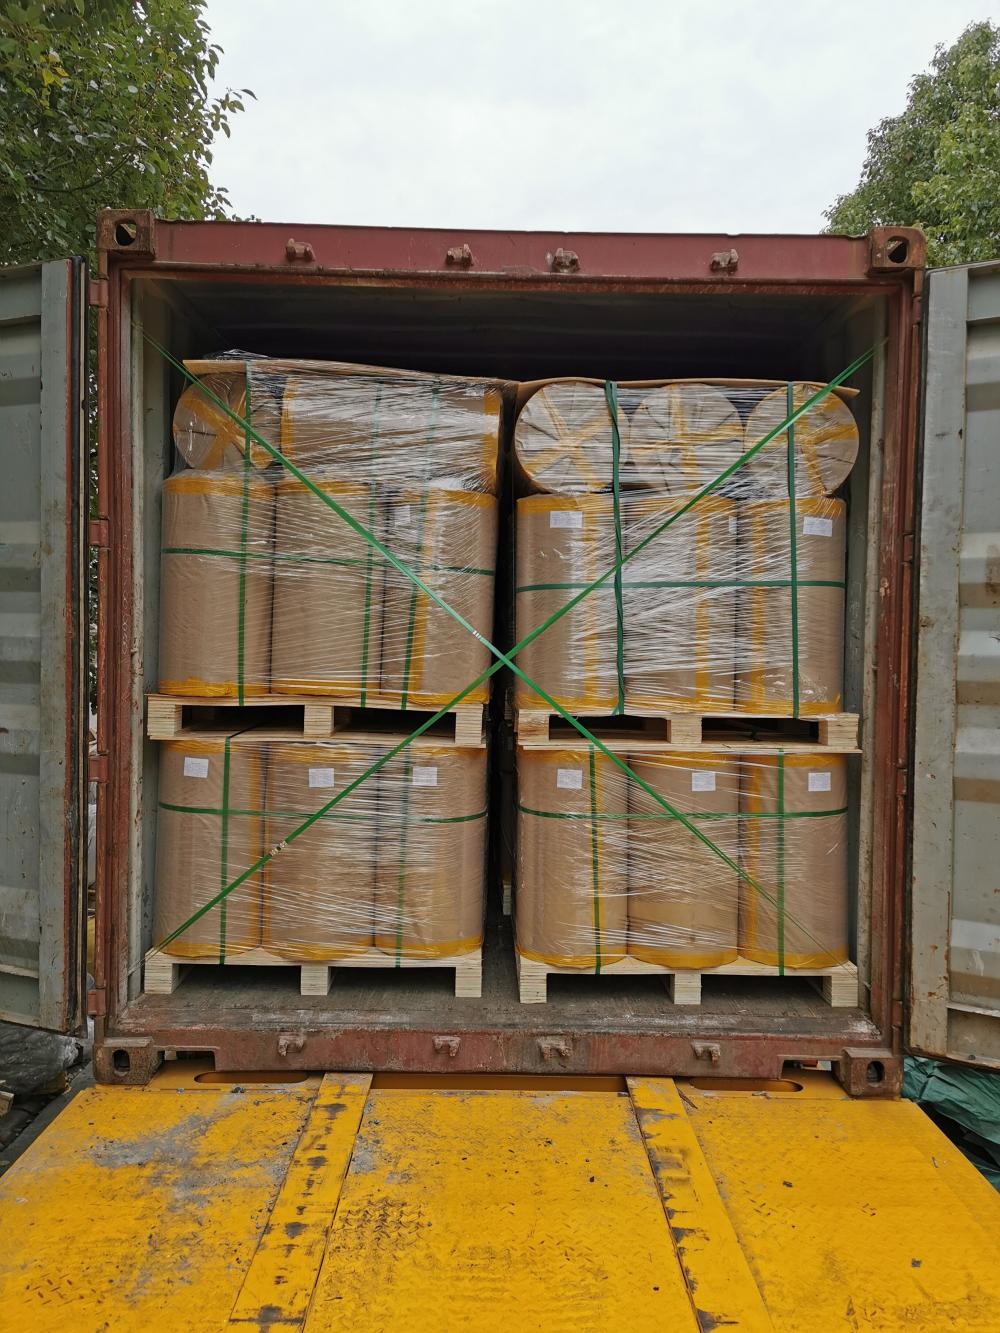 The packing of pvc film